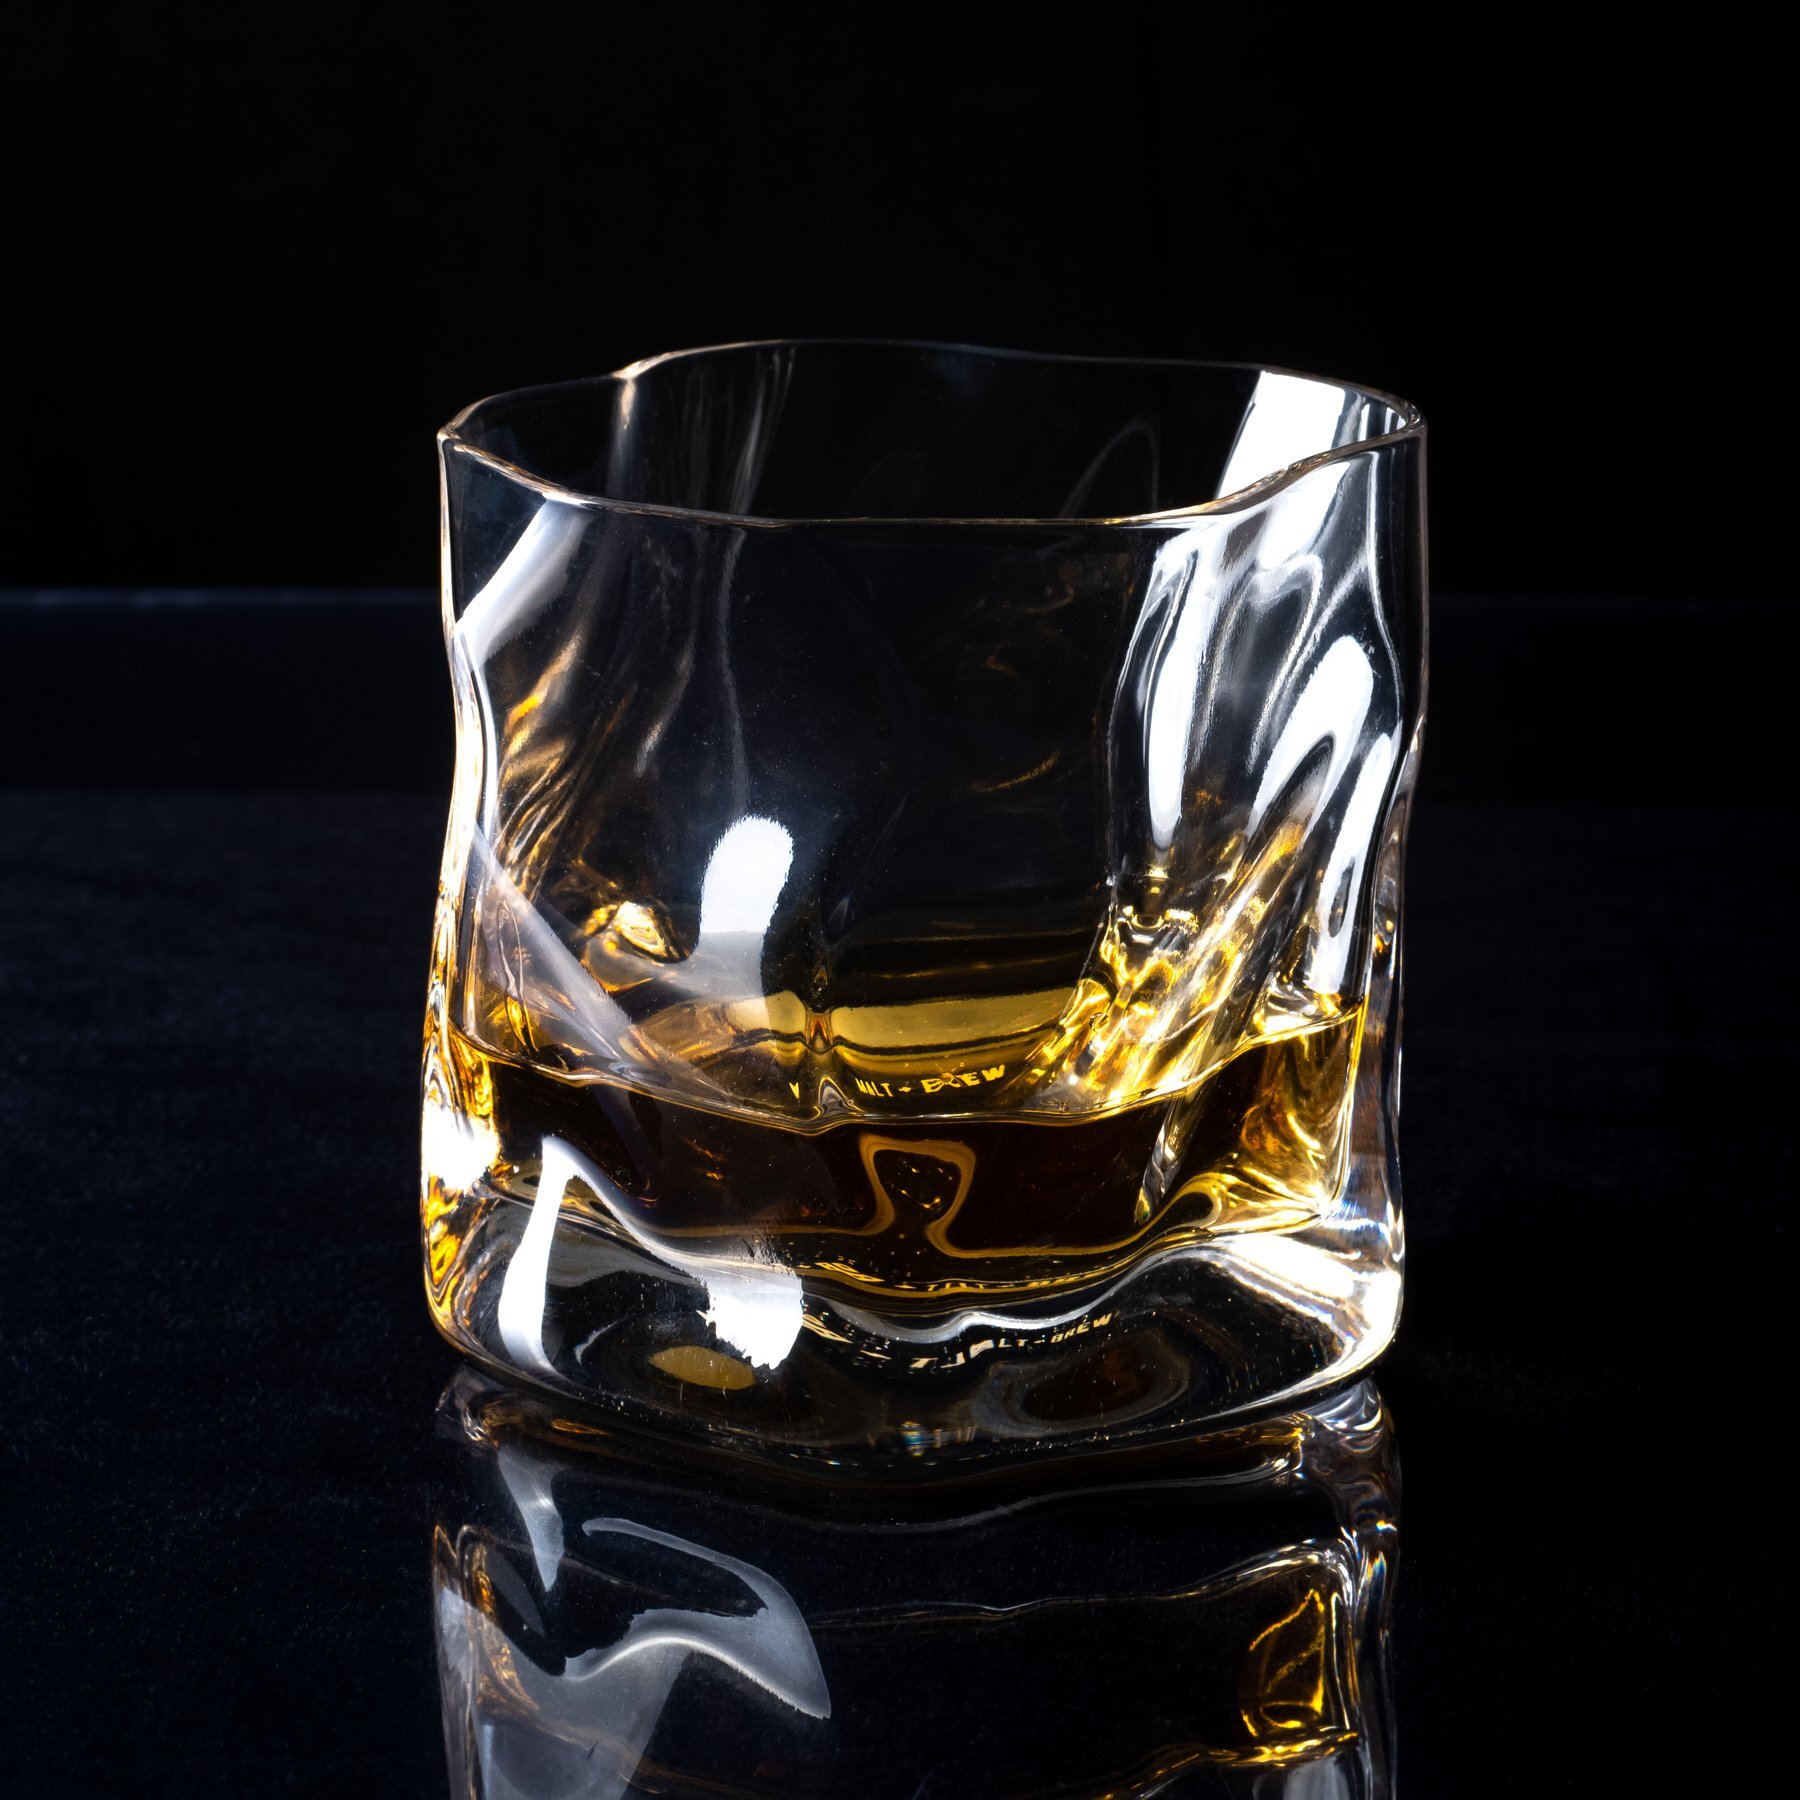 Macadoodles Fine Wine, Beer & Spirits - Attention all whisky drinkers! Norlan  Whisky Glasses are now available at Southside Macadoodles! These  award-winning glasses are transparent double walled vessels, designed with  the intention